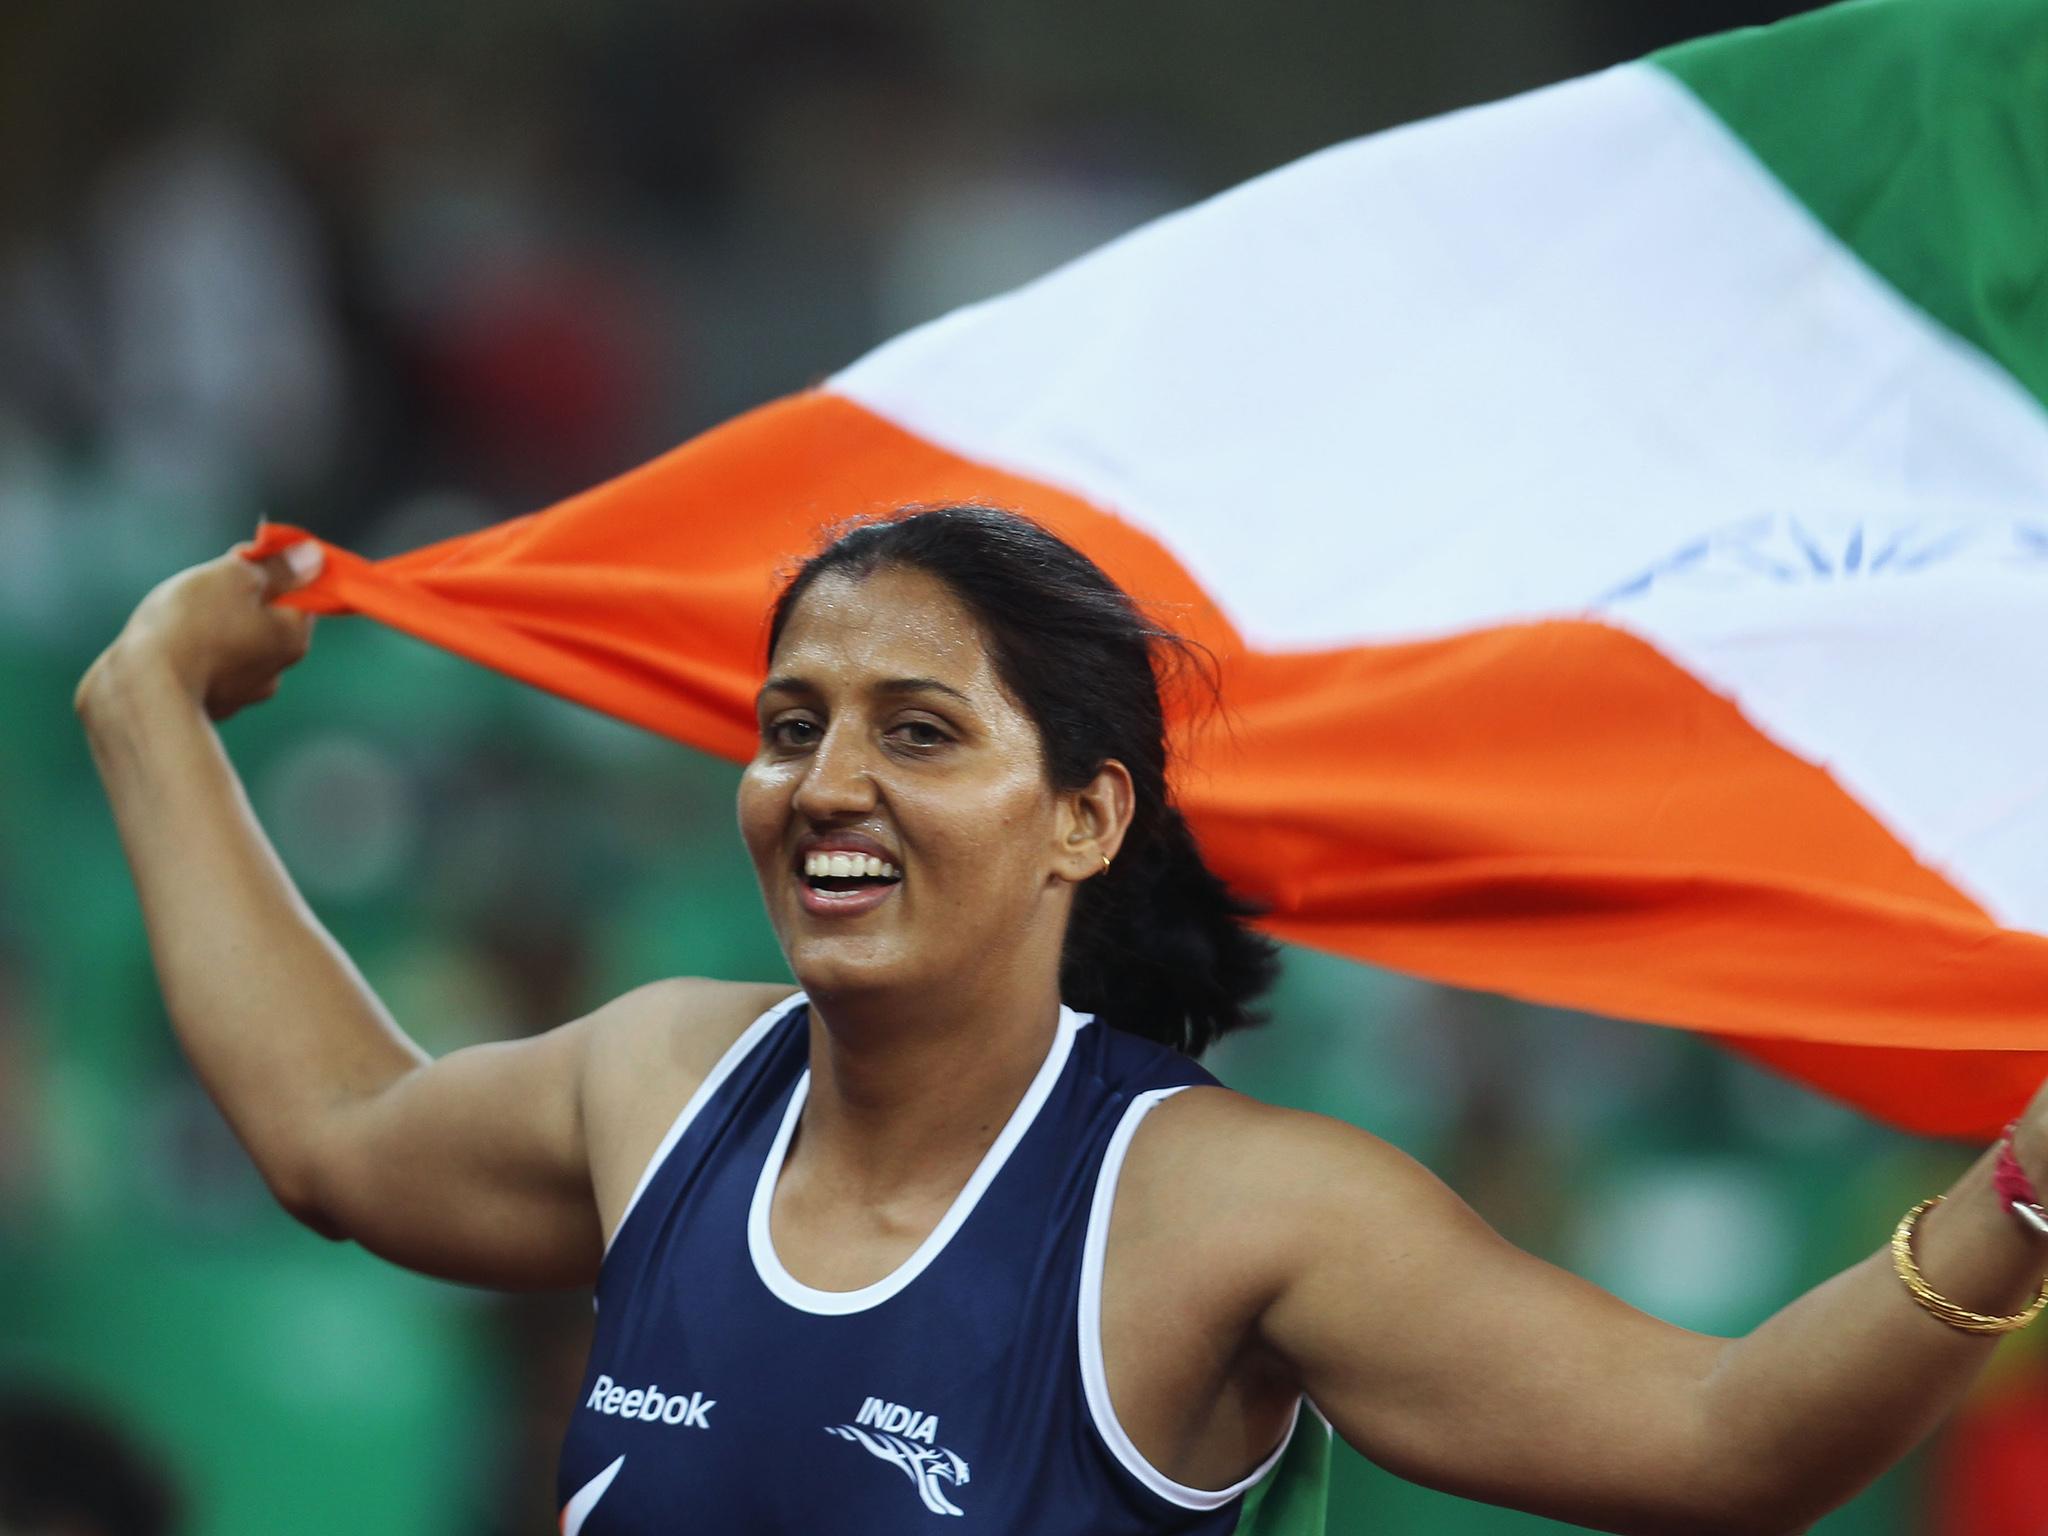 Commonwealth Games gold medallist Krishna Poonia has been involved in women's rights campaigning for a long time